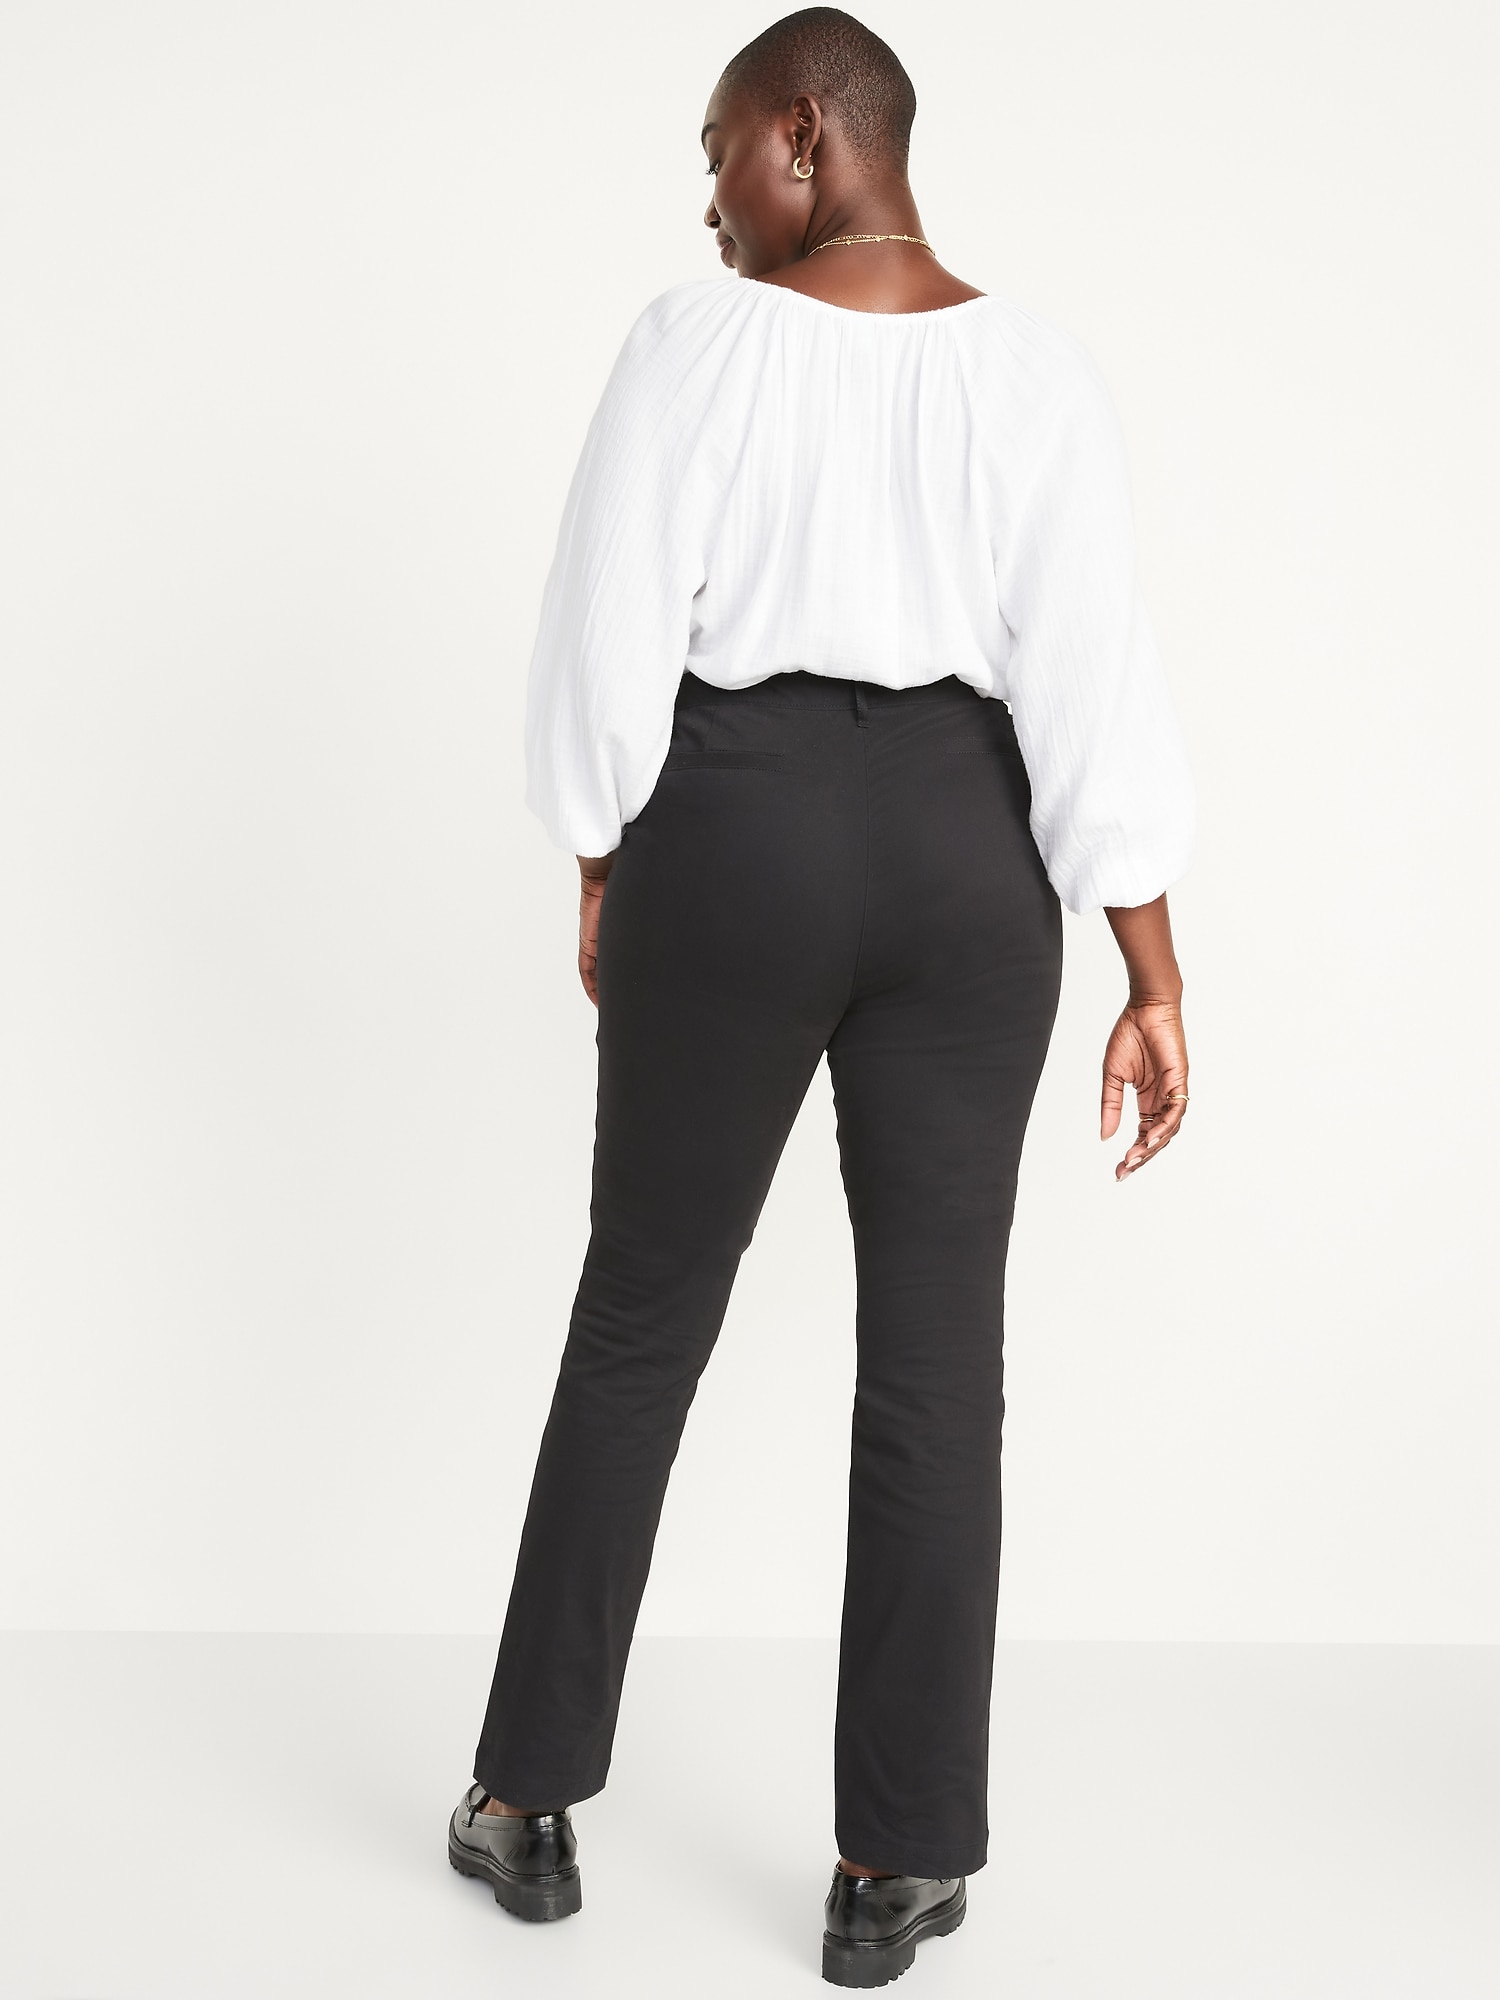 High-Waisted Wow Stretch Boot-Cut Pants for Women | Old Navy